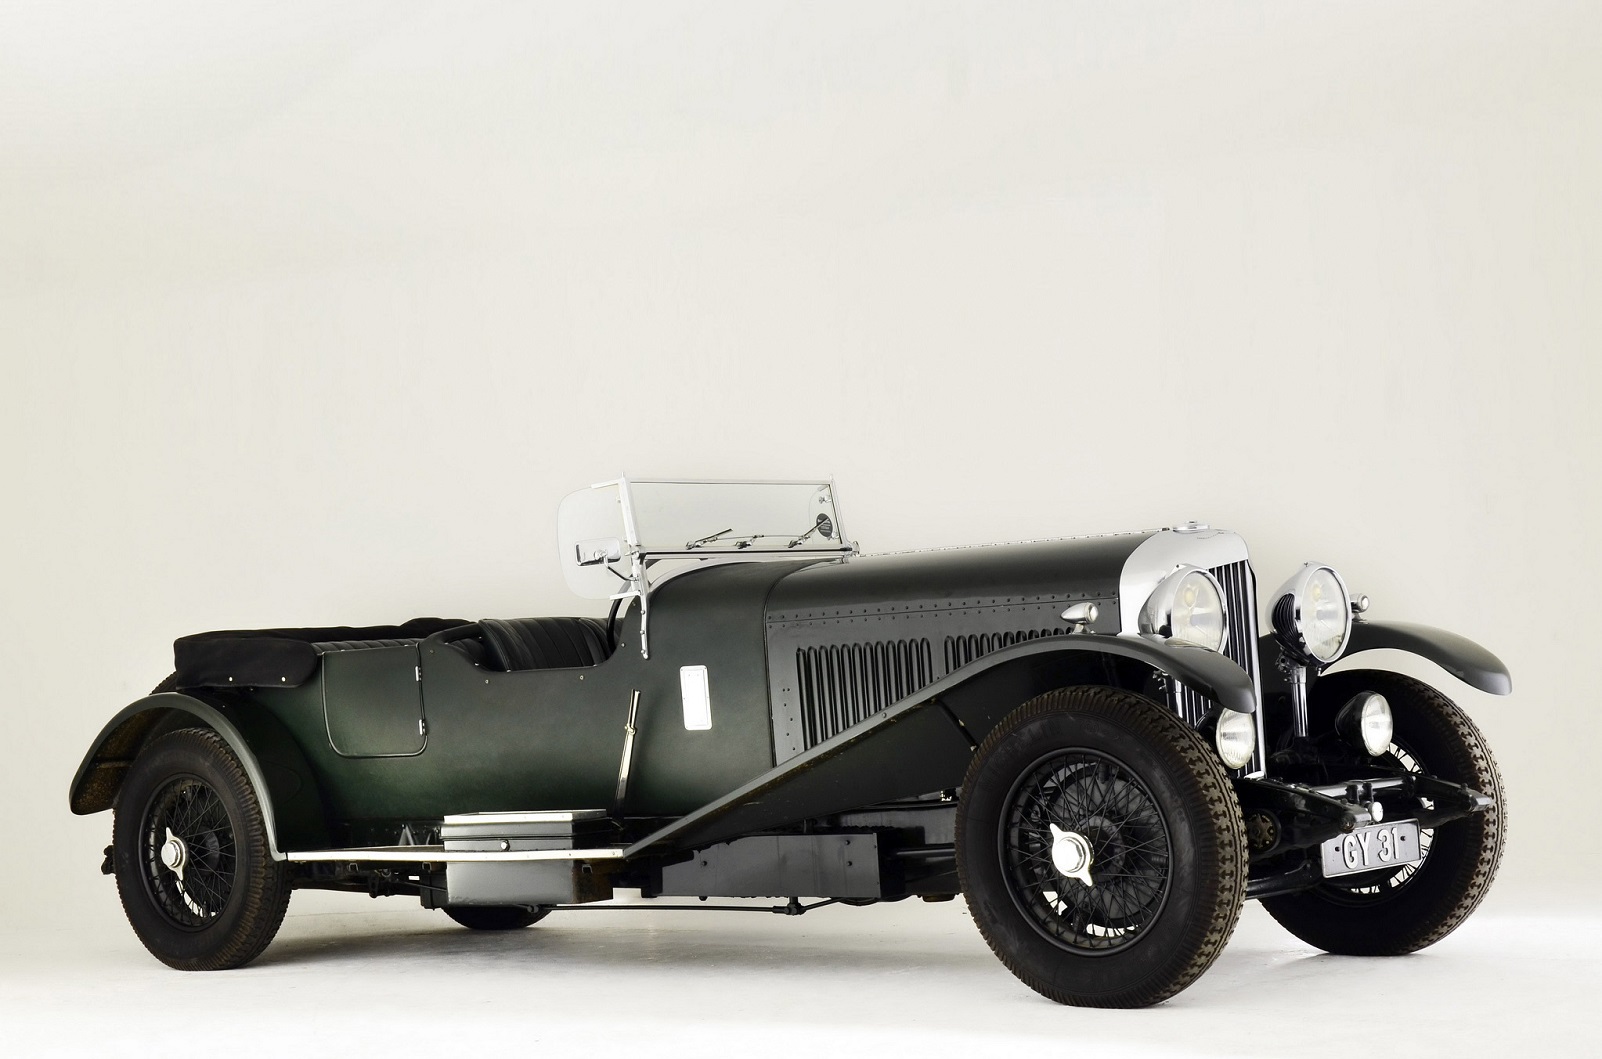 <p>The Bentley 8-Litre was the <strong>hypercar</strong> of its time in the early 1930s. It earned this position not only because a mere <strong>100</strong> were built, but because its huge 7982cc six-cylinder engine was so far removed from those motors used in most mainstream cars.</p><p>Everything about this engine was of the highest grade, so the iron block was made in a single piece with non-detachable cylinder head for strength. The crankcase was formed from <strong>Elektron</strong> magnesium alloy and there were four valves per cylinder. Twin spark ignition came courtesy of a coil and magneto, while the engine had rubber mounts that were unusual for the period. Even more out of the ordinary was the 8-Litre’s <strong>220 hp</strong> power that made it one of the most powerful road cars available in 1931.</p>